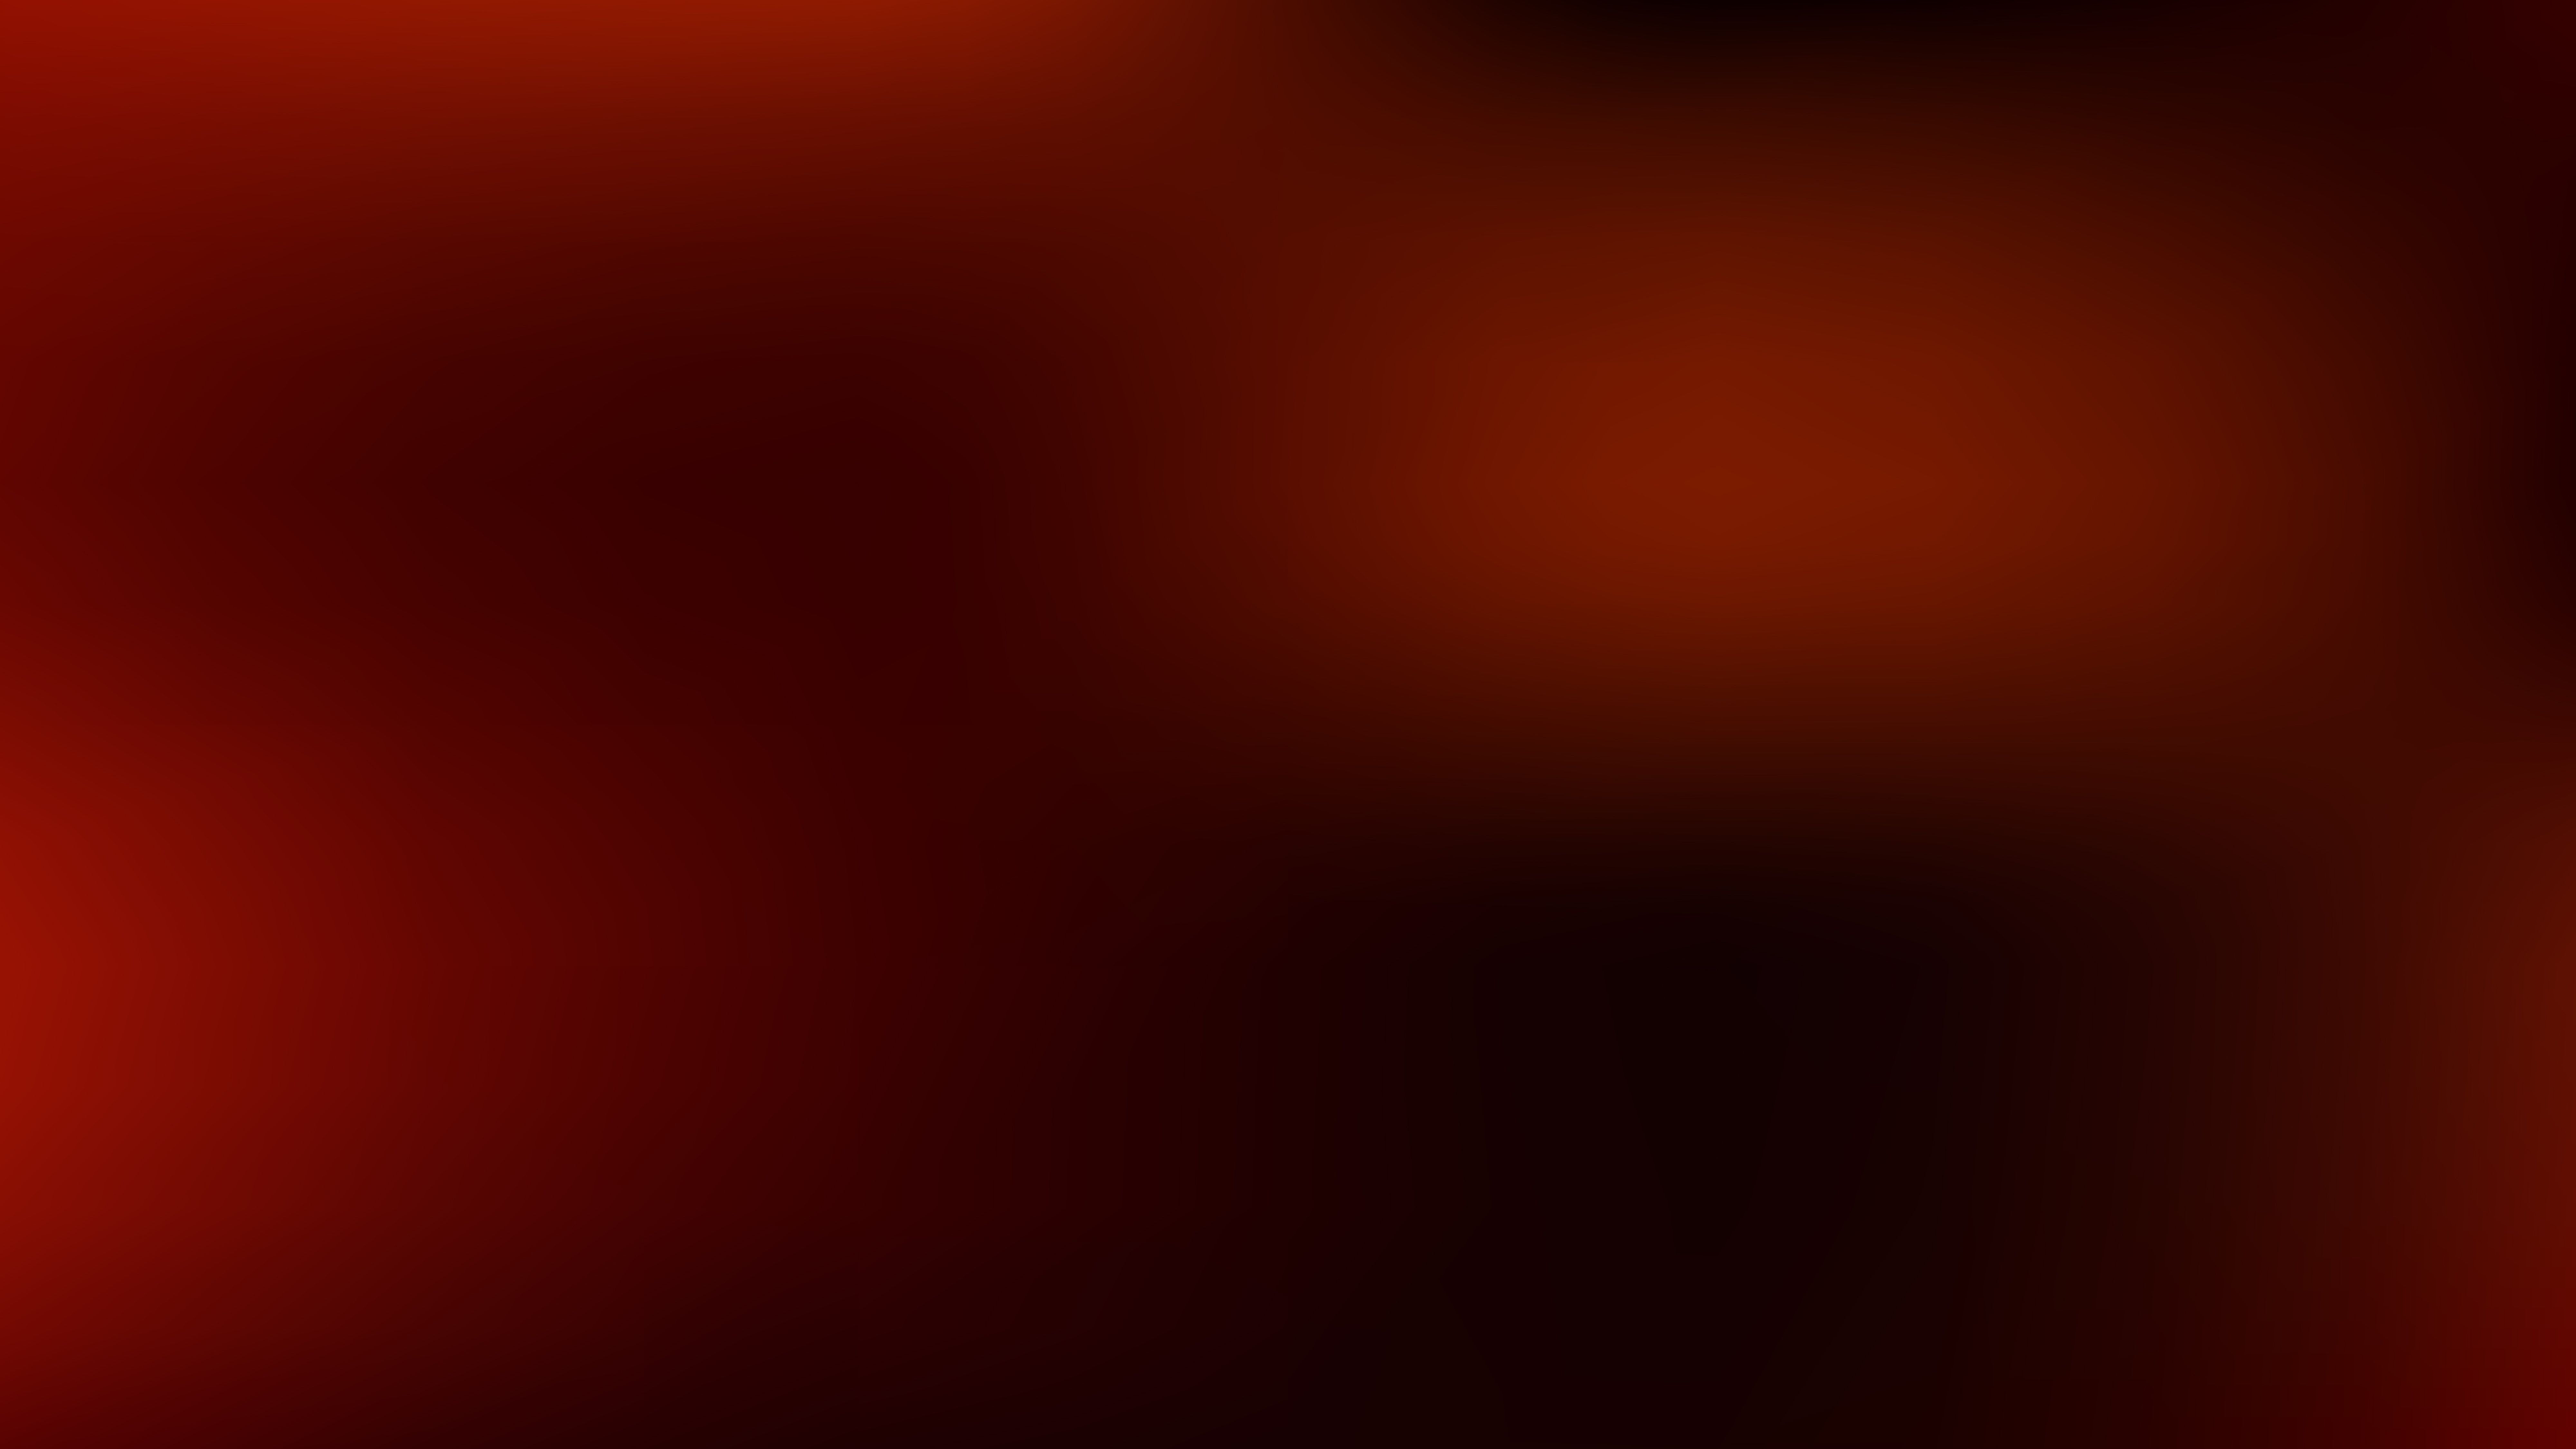 Red And Black Blur Photo Wallpaper Design And Black Blur Background